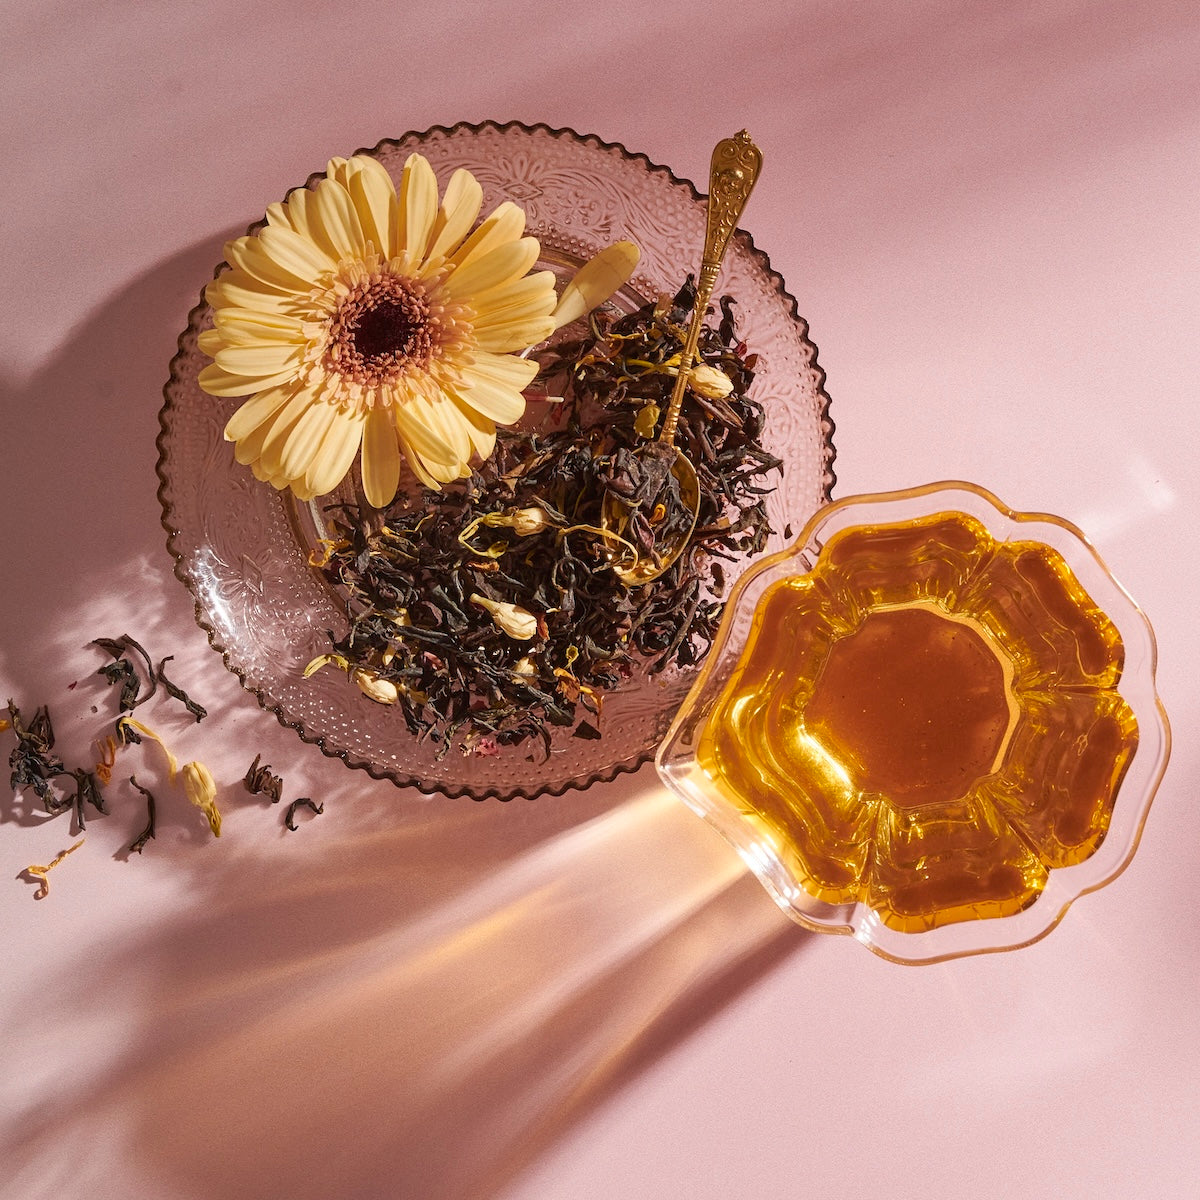 A glass dish filled with dried Goddess of Earl: Lady Luck Oriental Beauty Oolong Tea leaves by Magic Hour and a yellow flower sits next to a cup of brewed tea. A gold spoon rests on the tea leaves, releasing hints of bergamot. The scene is set against a pink surface, with light casting soft shadows.